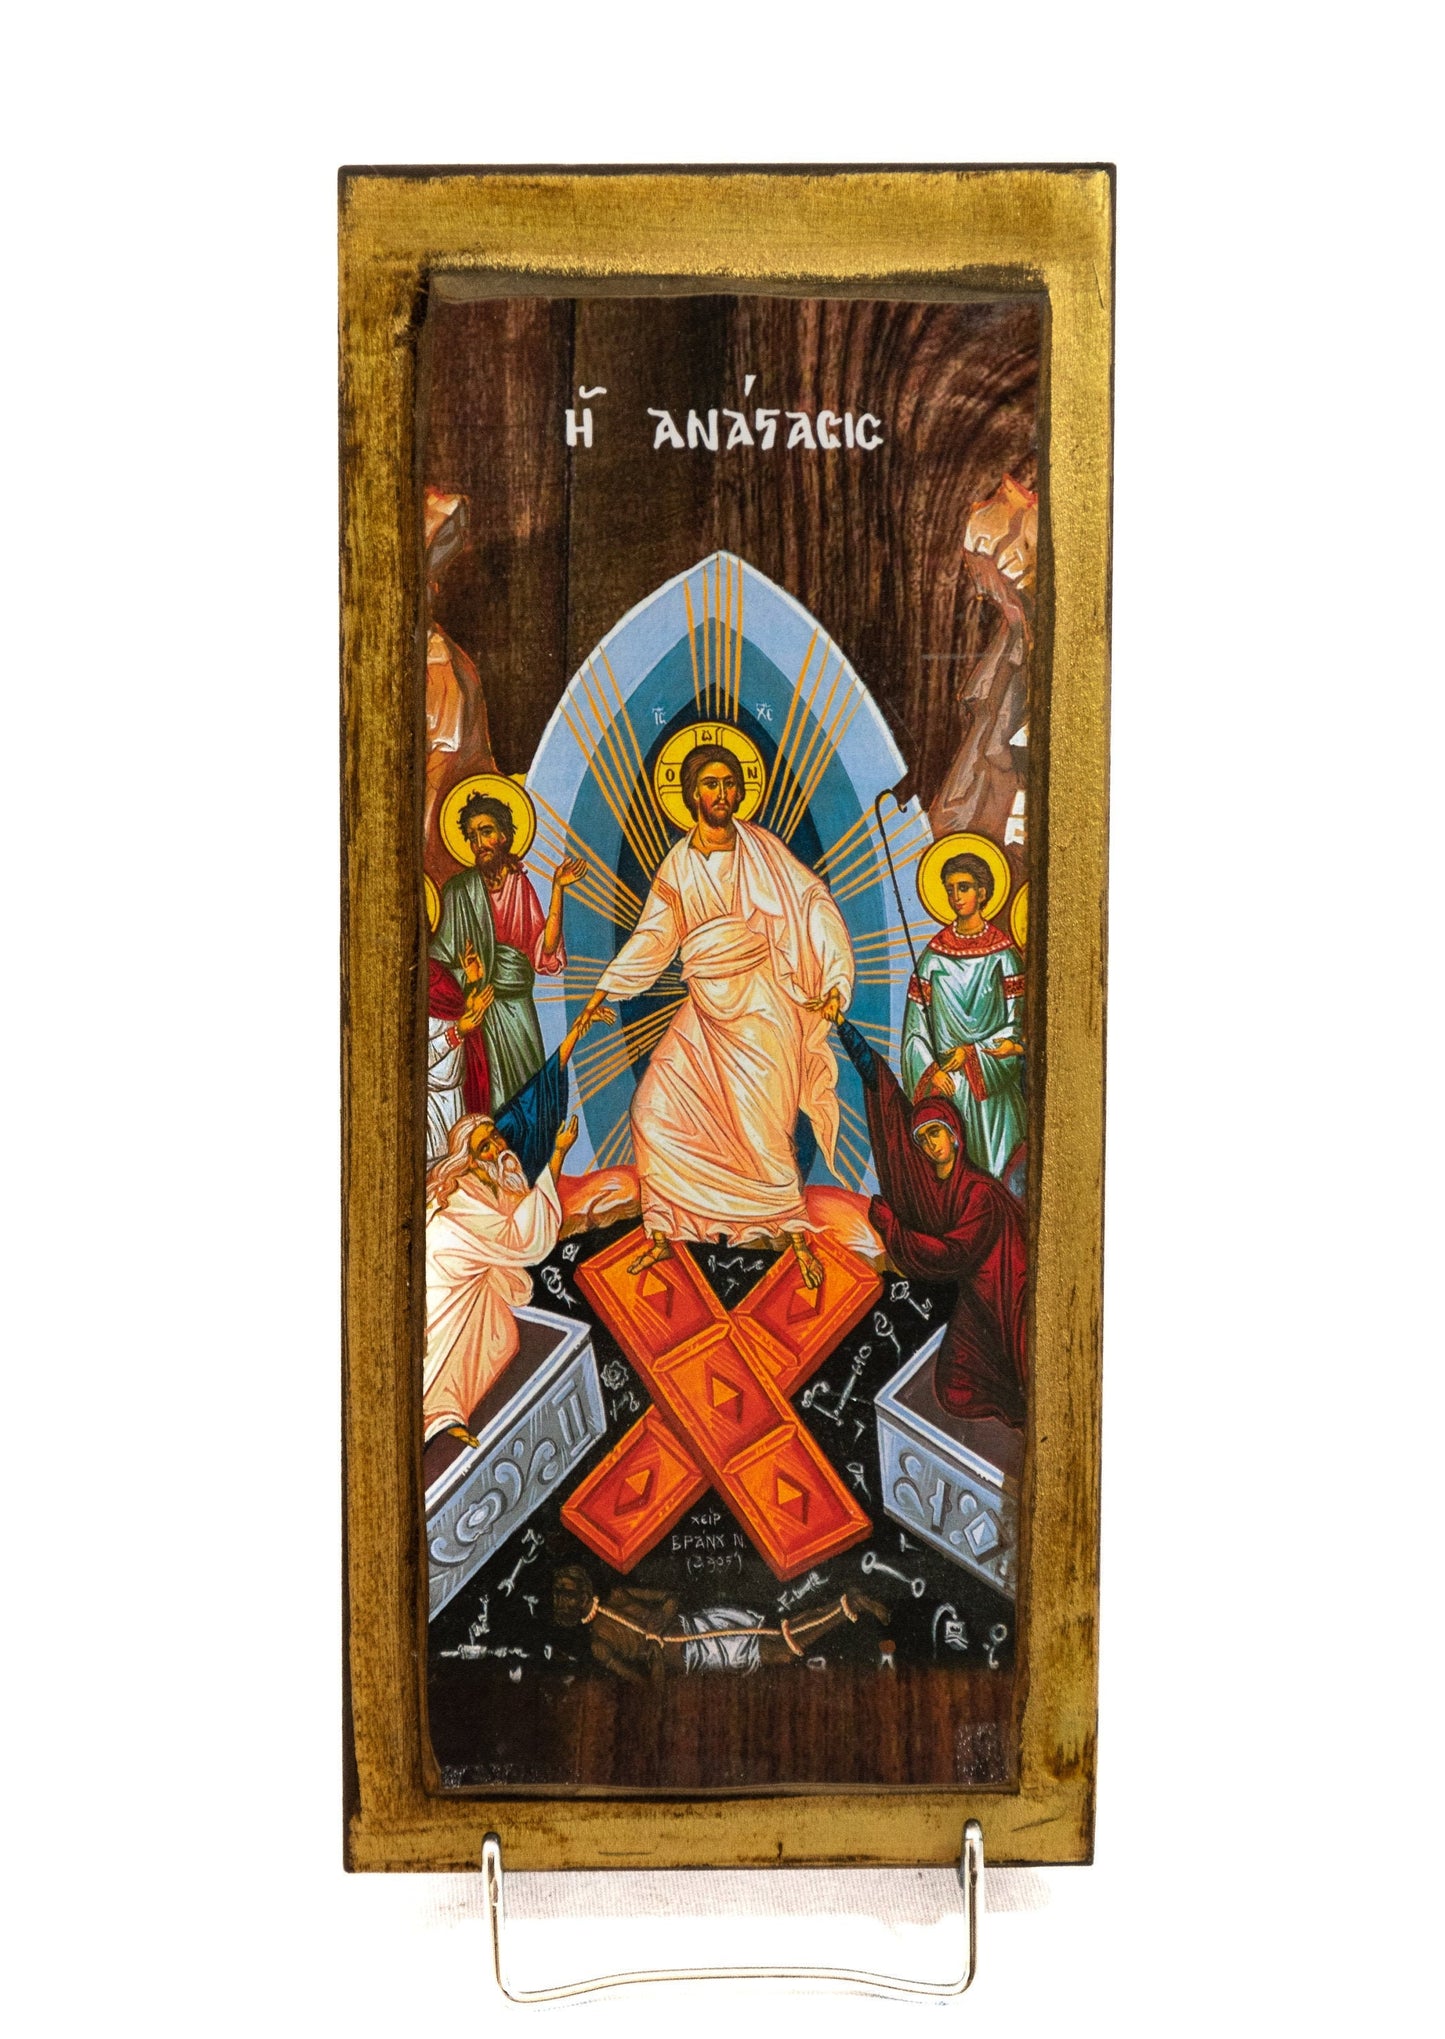 Resurrection Jesus Christ icon, Handmade Greek Orthodox icon, Byzantine art wall hanging wood plaque of our Lord rising from the dead, gift TheHolyArt